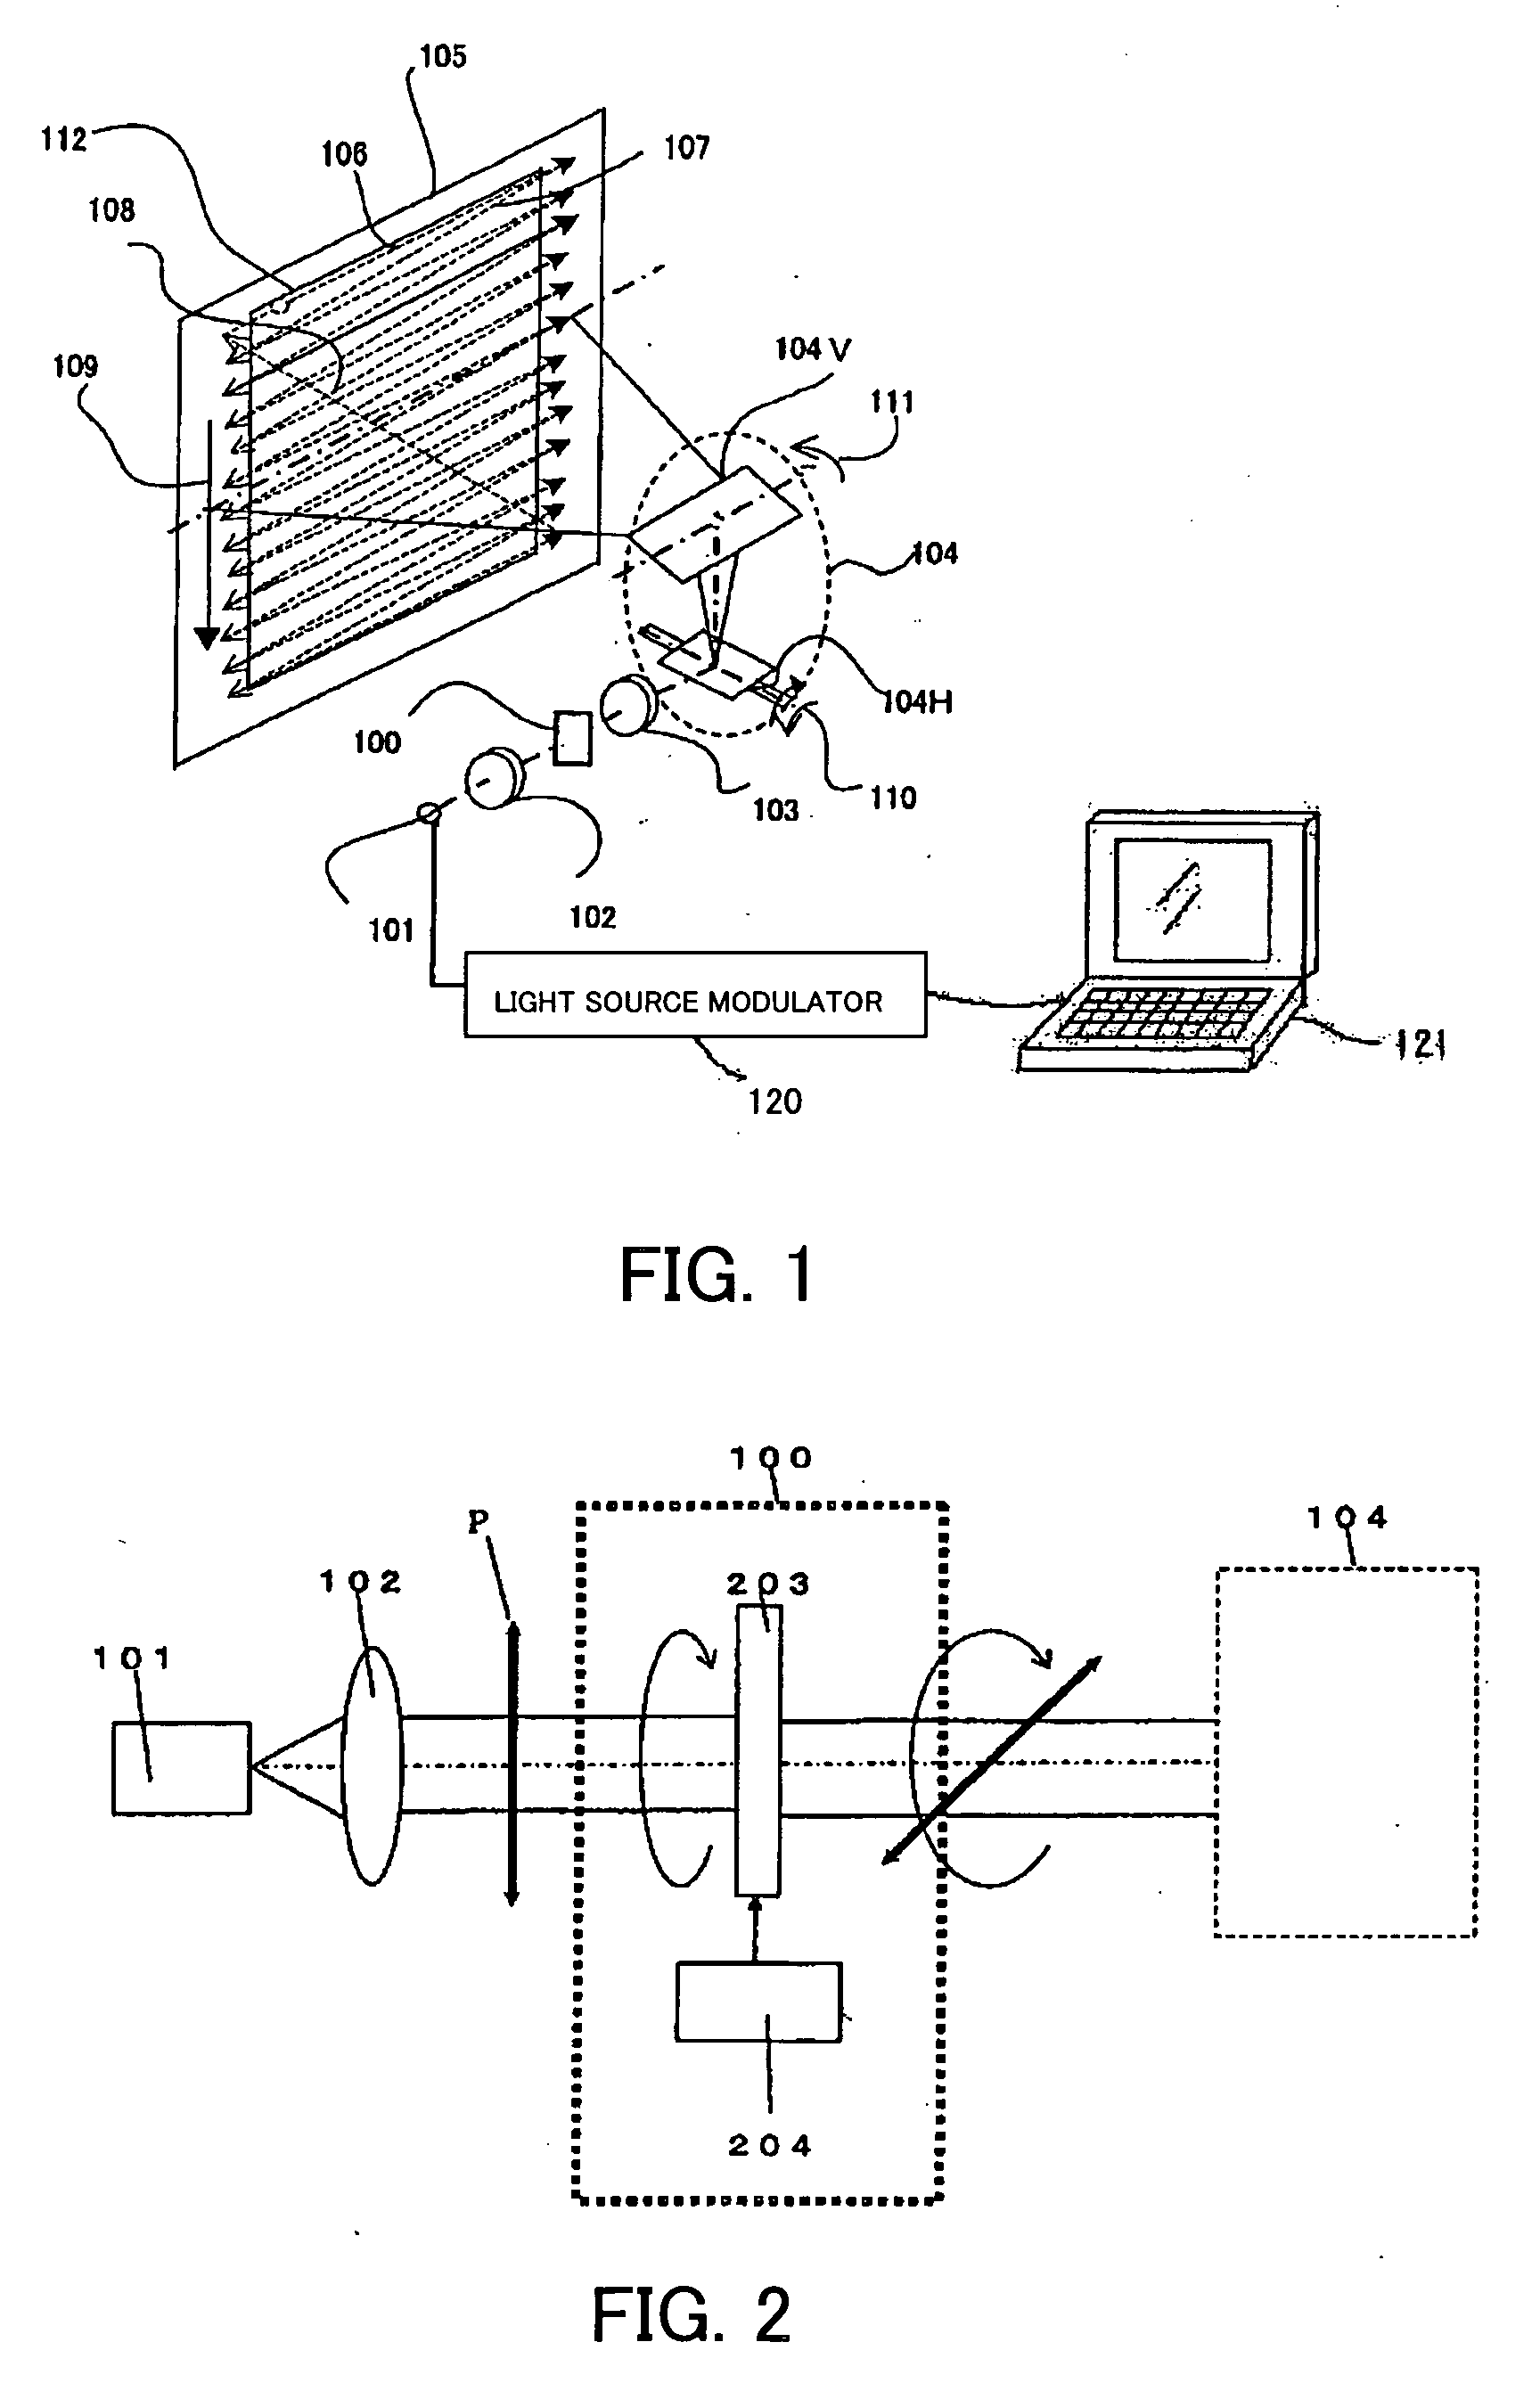 Displaying optical system and image projection apparatus